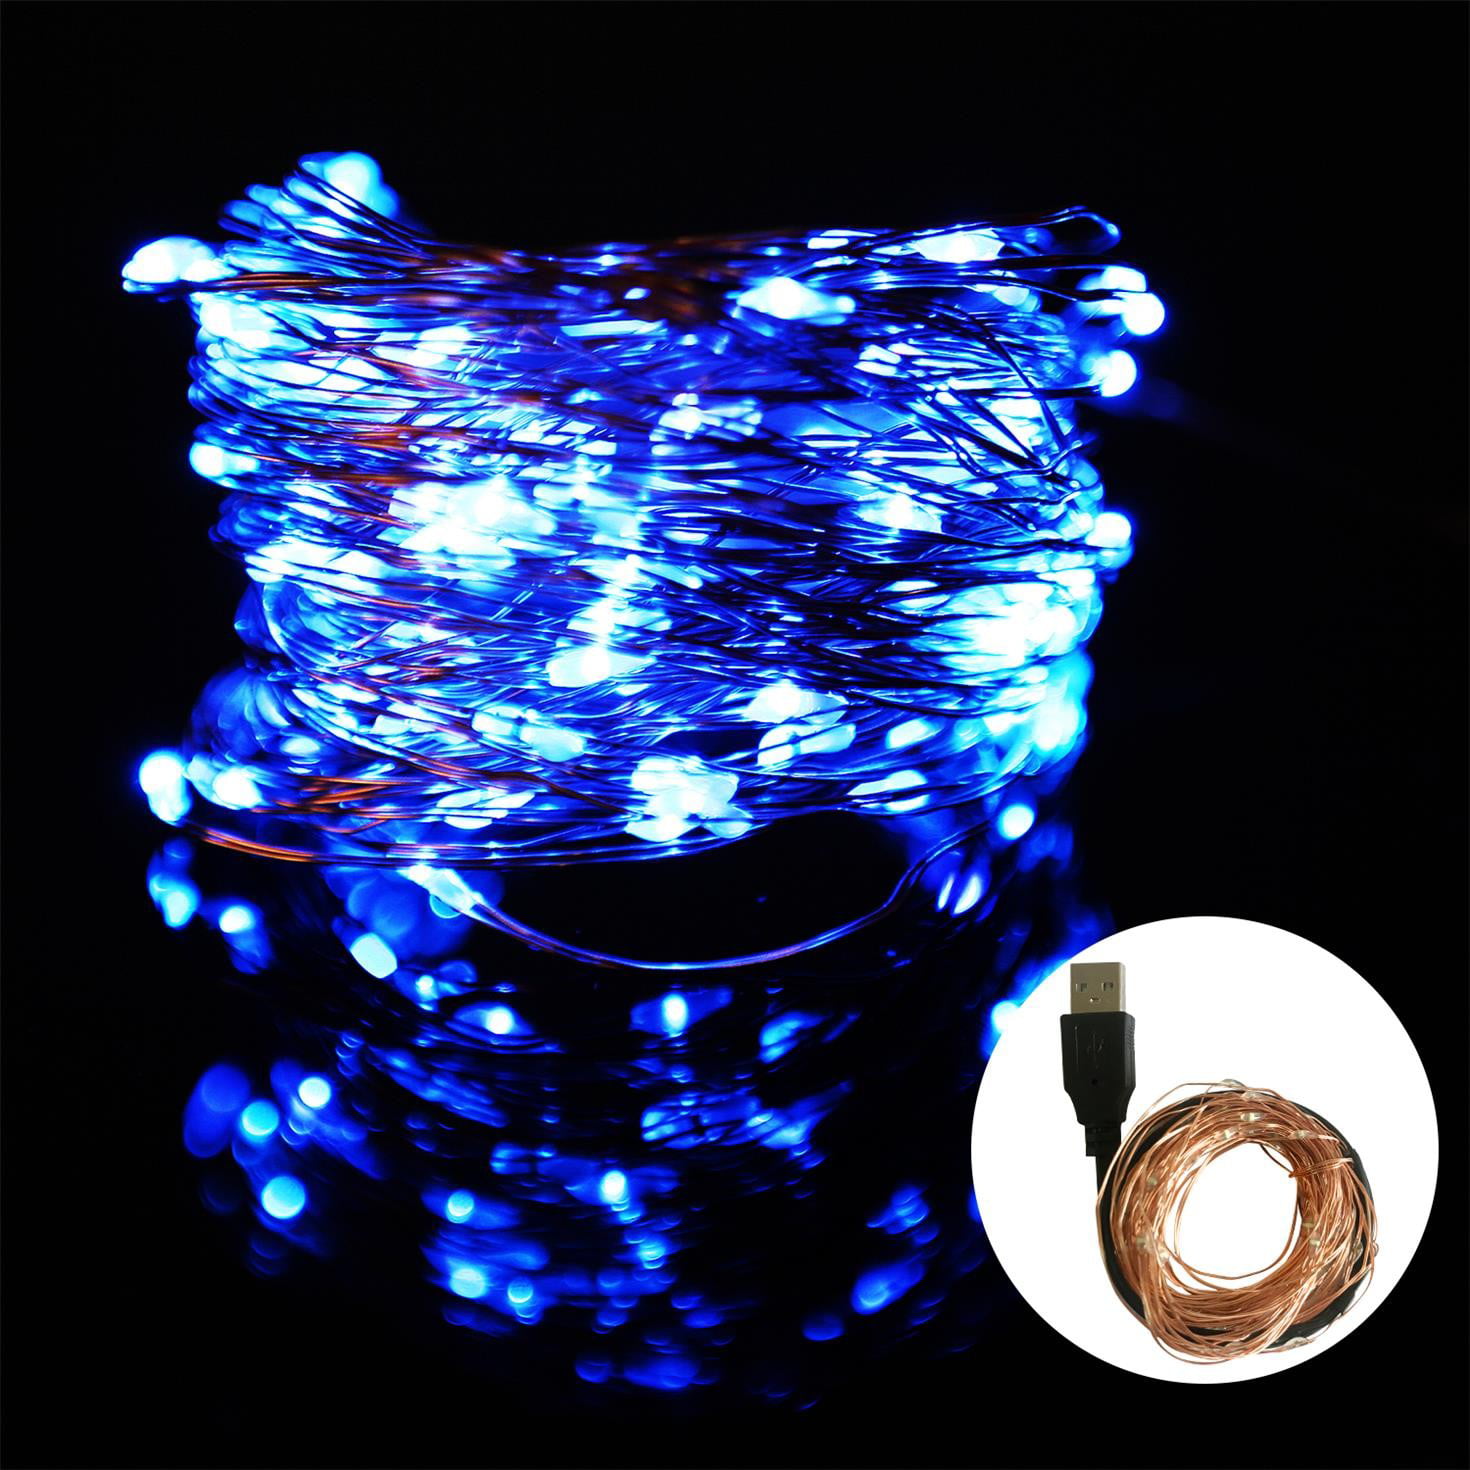 USB Plug In 100LED DIY Micro Copper Wire String Lights Party Static Fairy Lights